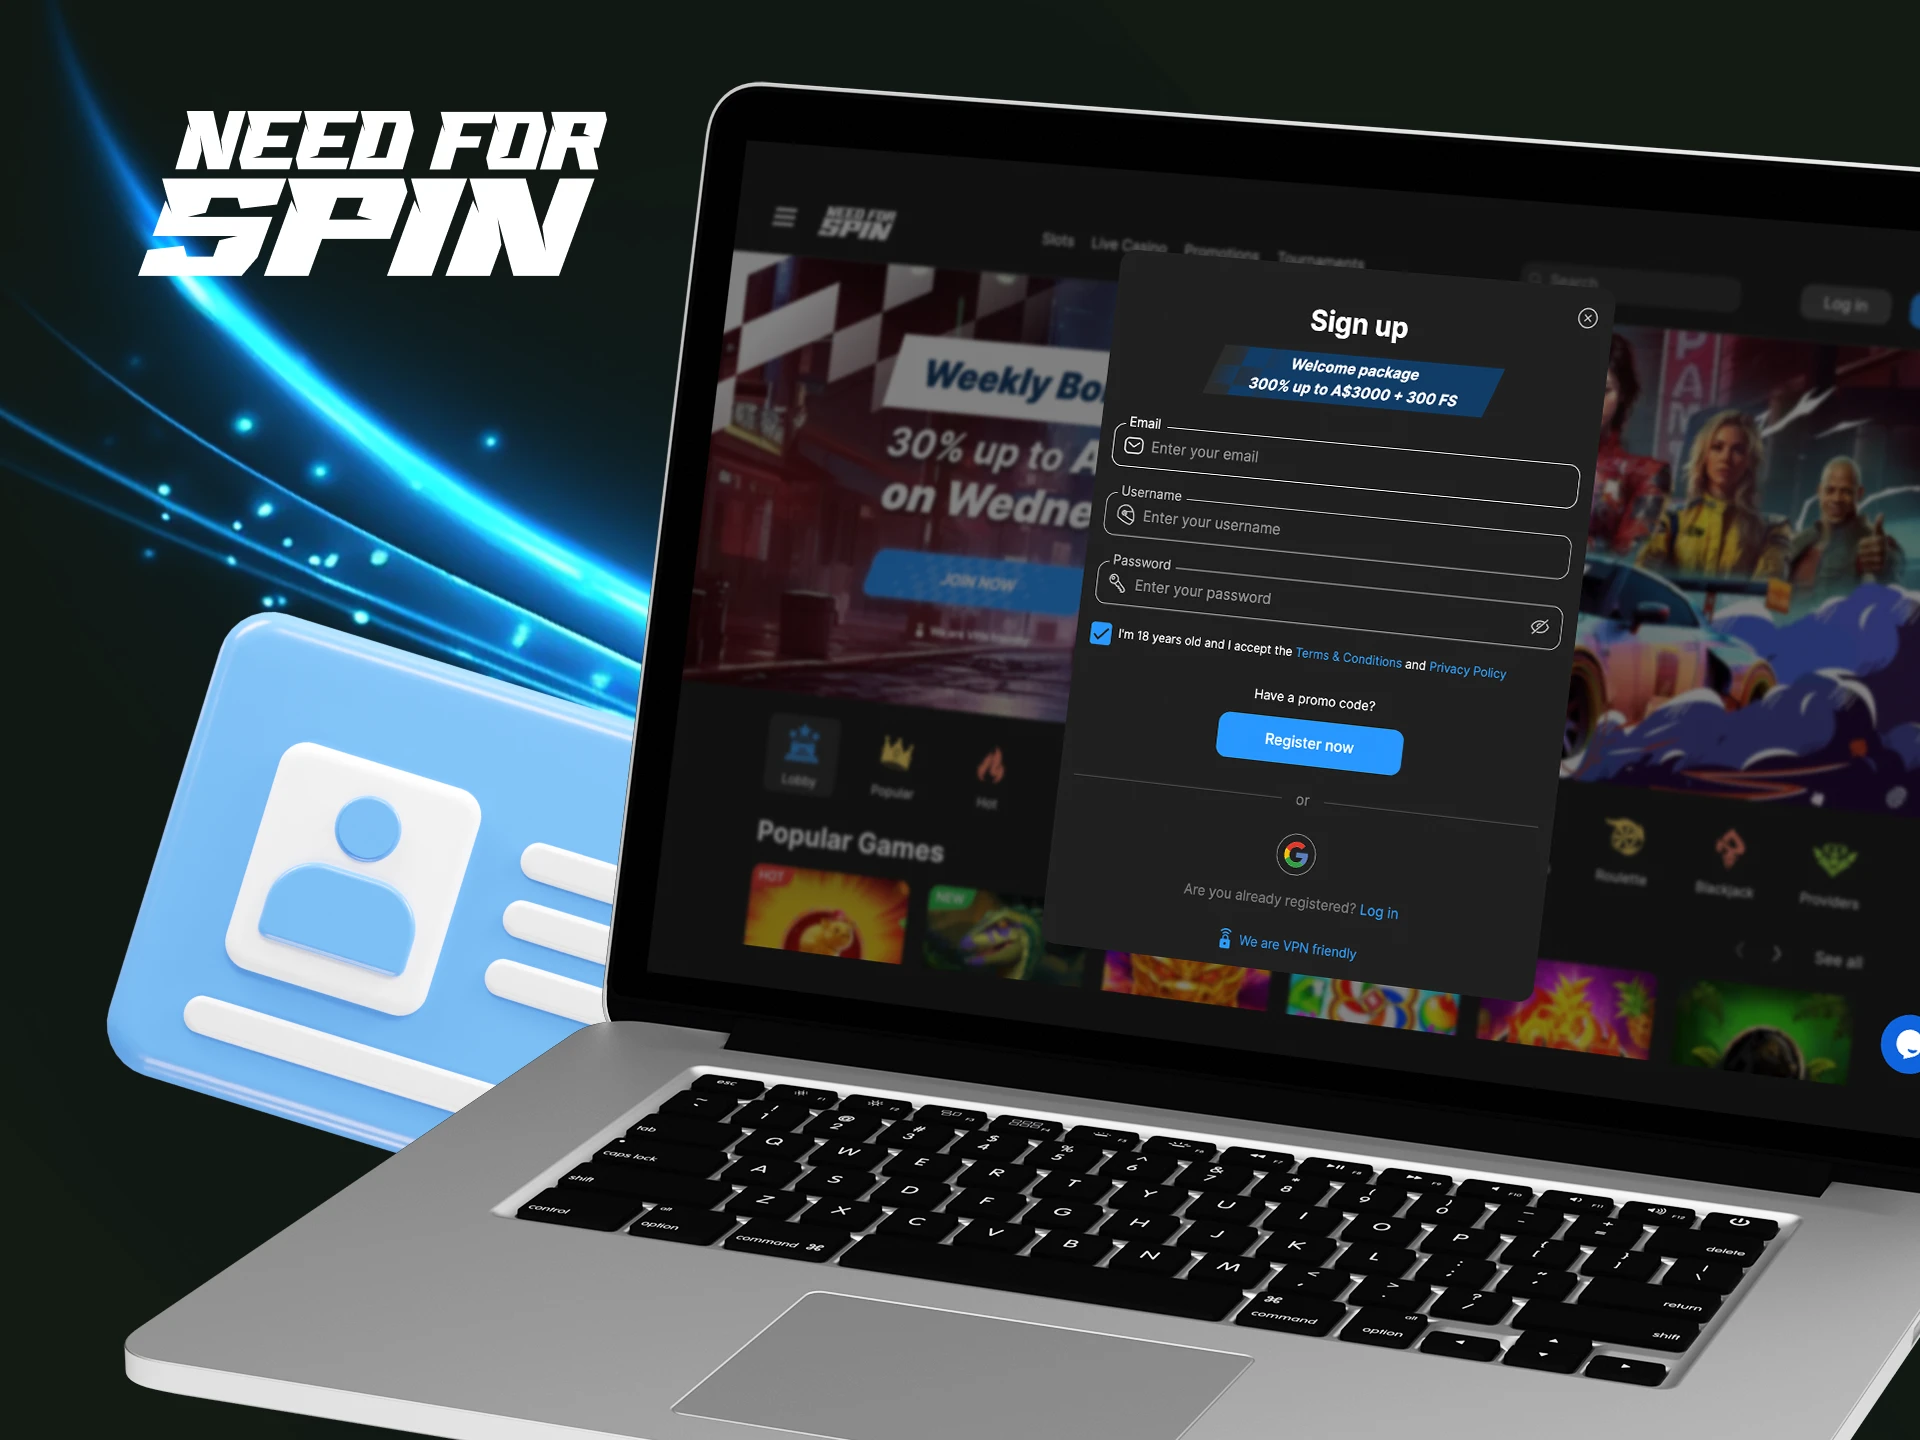 Instructions on how to create a new account on the Need For Spin online casino website.